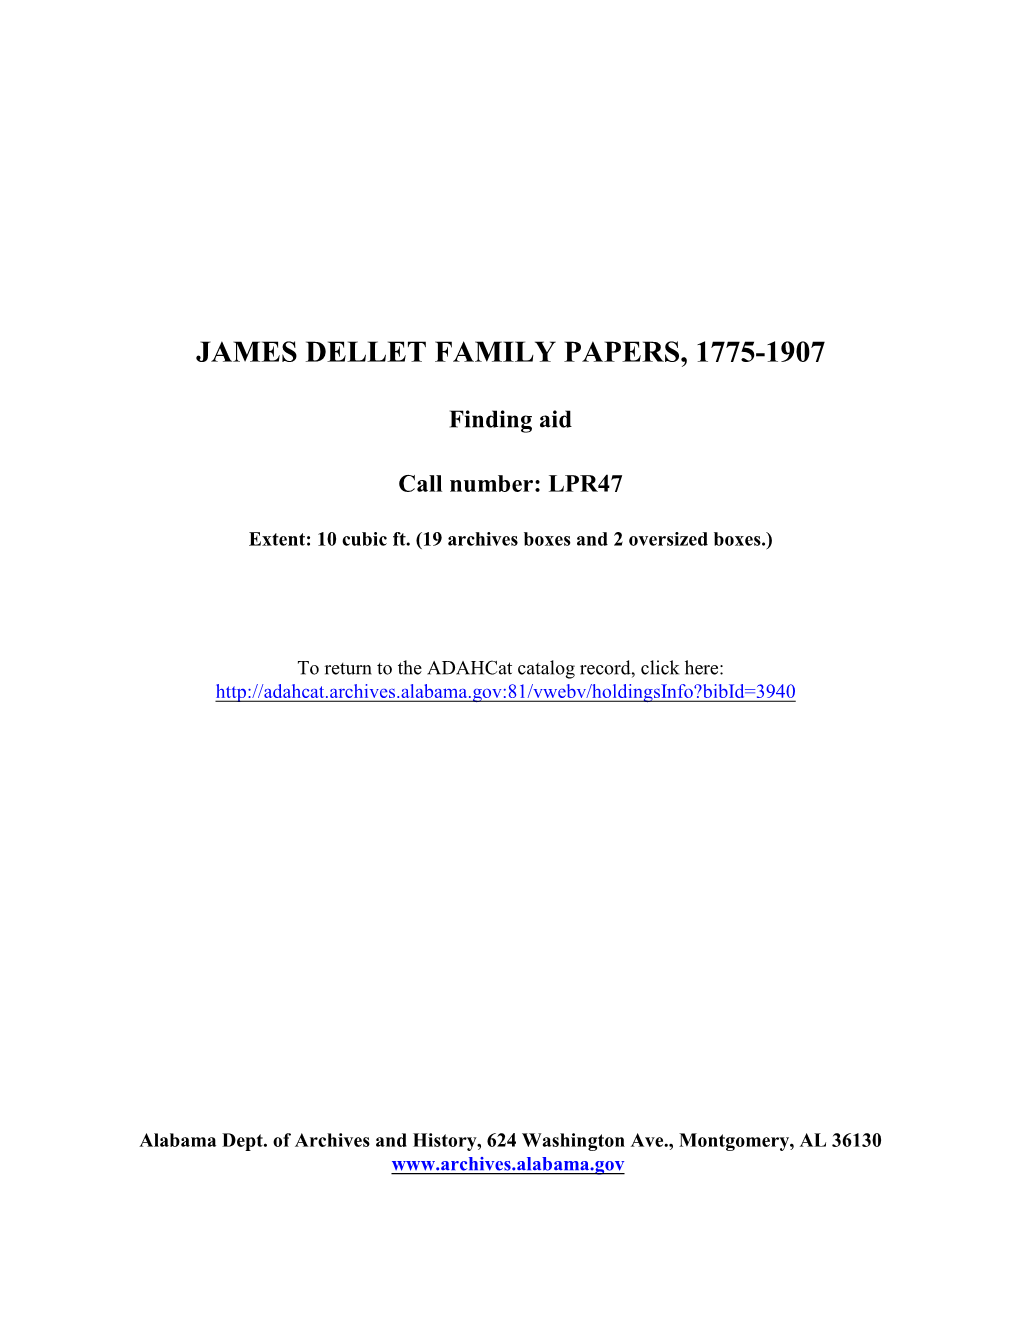 James Dellet Family Papers Finding